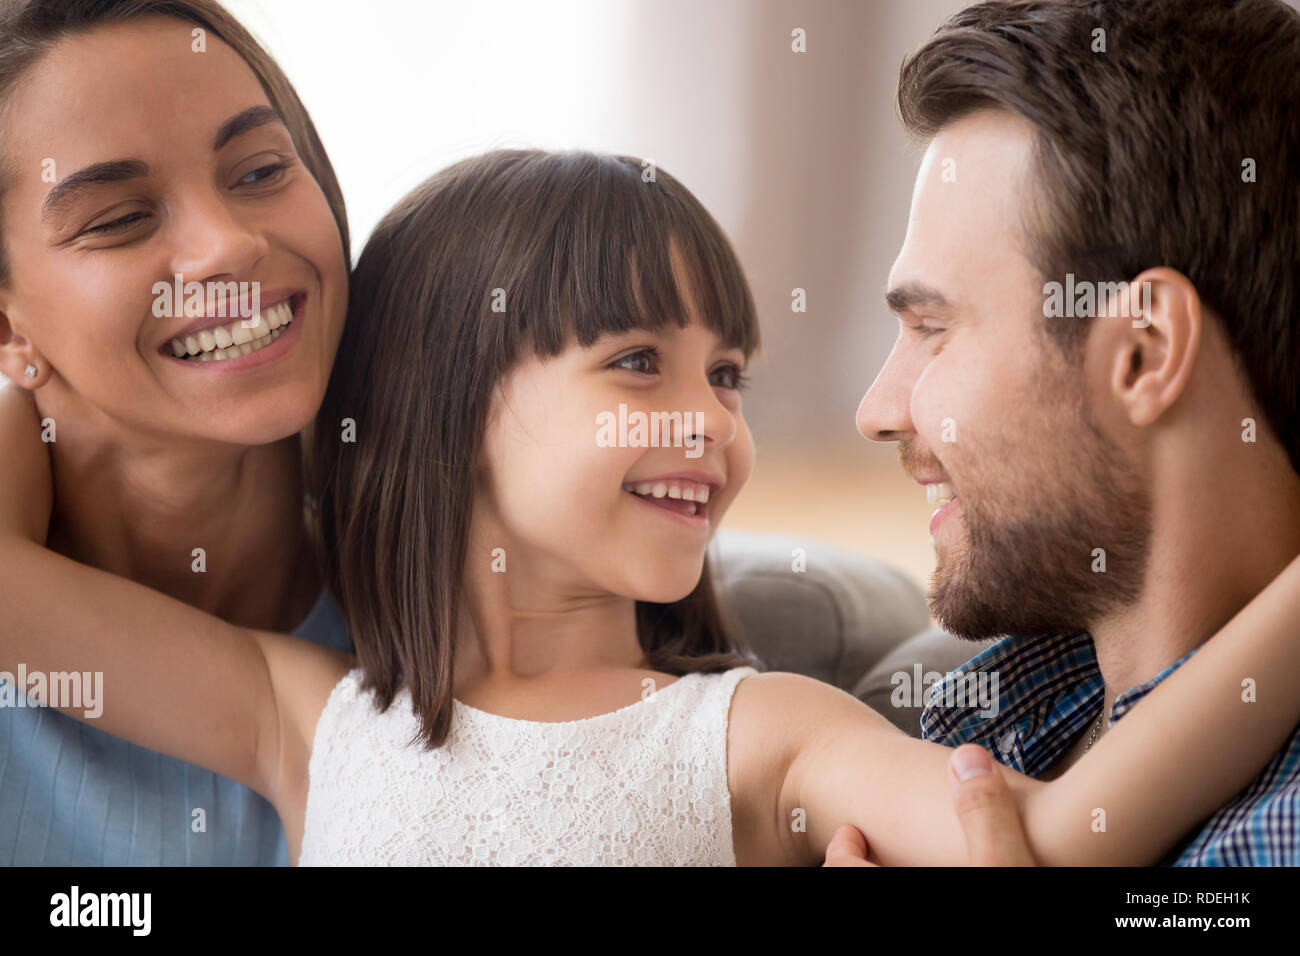 Happy kid daughter embracing parents looking at smiling mom Stock Photo